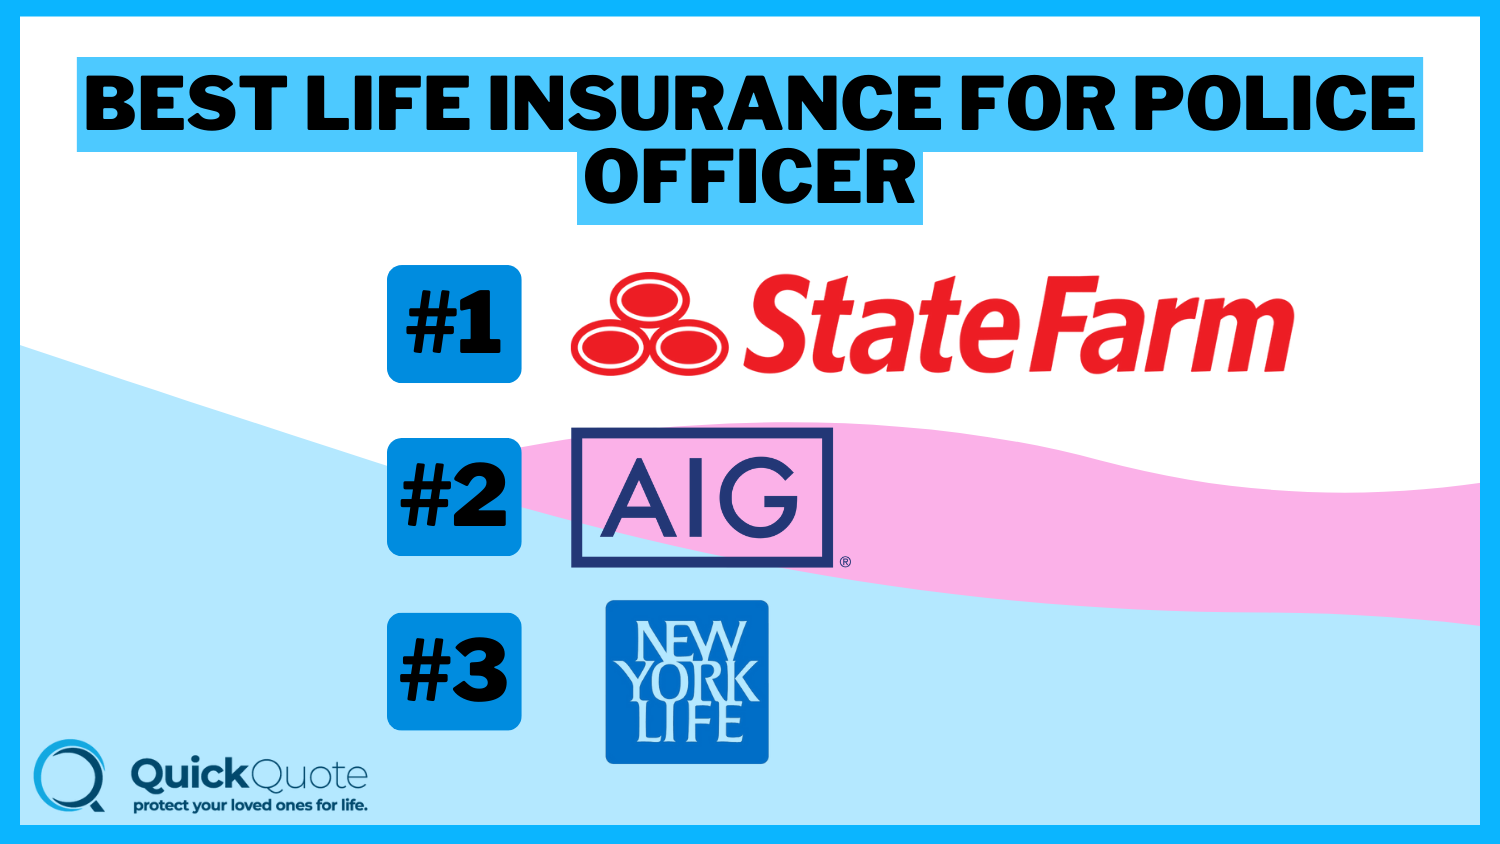 State Farm, AIG, and New York Life: Best Life Insurance for Police Officers